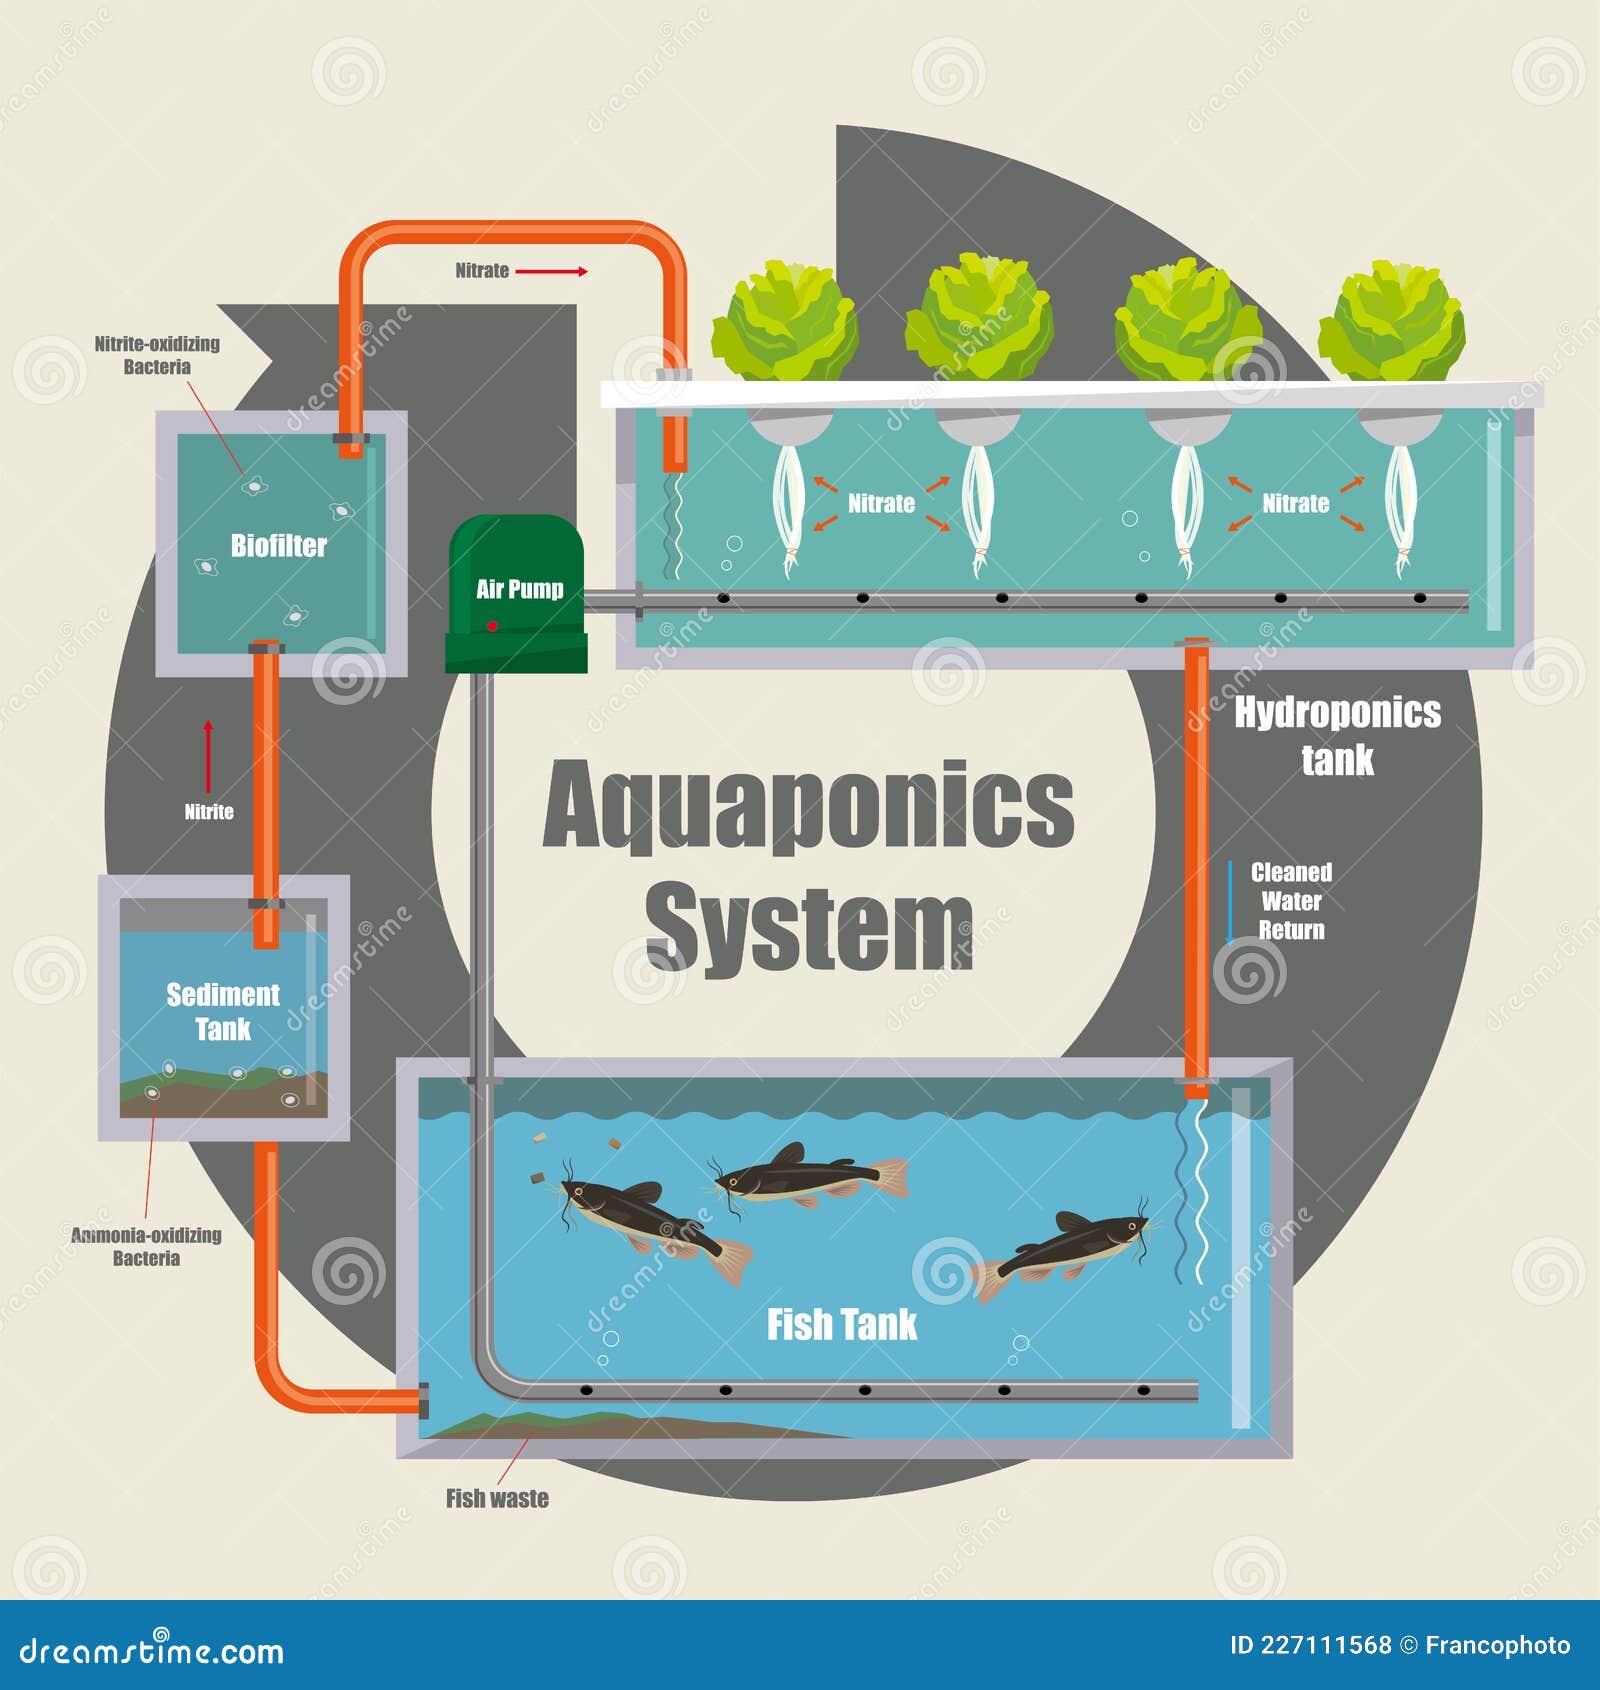 Aquaponics System In Smart Farming Method Flow Of Water And Nutritions ...